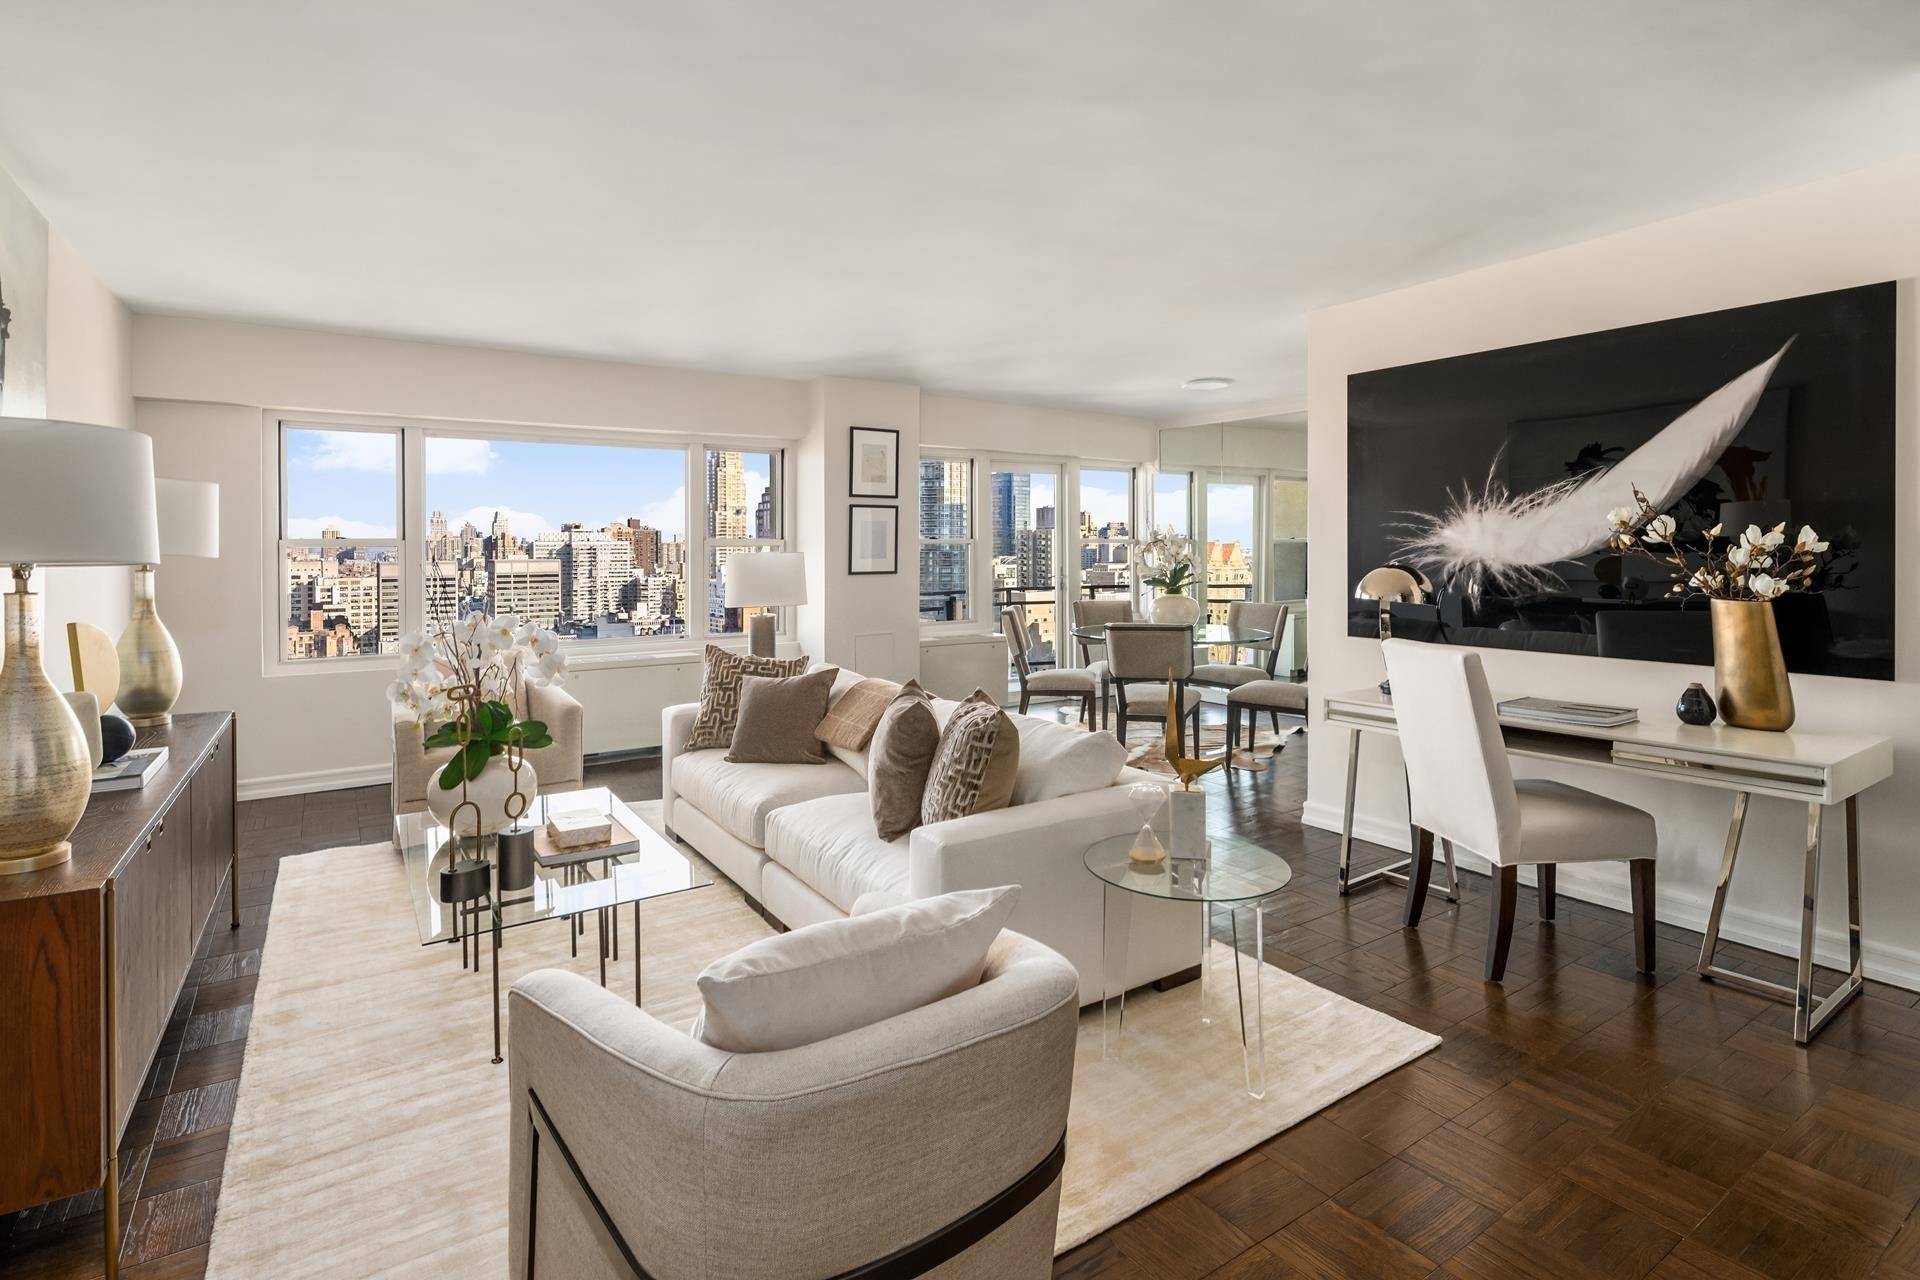 Co-op Properties for Sale at Plaza Tower, 118 E 60TH ST, 33C Lenox Hill, New York, NY 10022